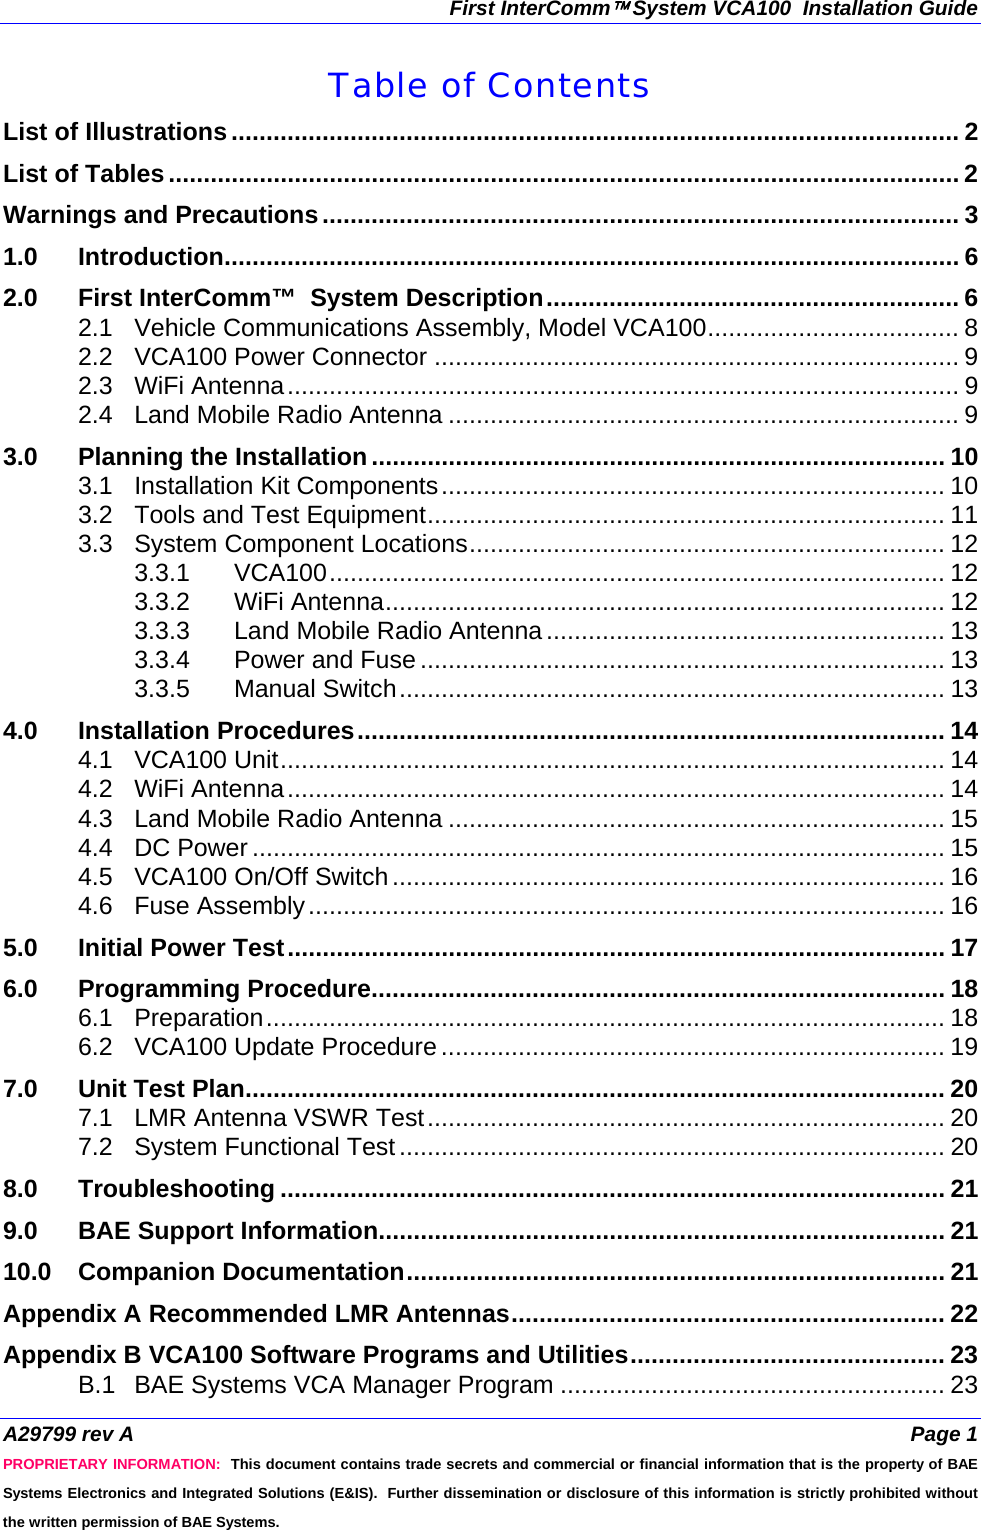 First InterComm™ System VCA100  Installation Guide A29799 rev A  Page 1 PROPRIETARY INFORMATION:  This document contains trade secrets and commercial or financial information that is the property of BAE Systems Electronics and Integrated Solutions (E&amp;IS).  Further dissemination or disclosure of this information is strictly prohibited without the written permission of BAE Systems. Table of Contents List of Illustrations........................................................................................................ 2 List of Tables................................................................................................................. 2 Warnings and Precautions........................................................................................... 3 1.0 Introduction......................................................................................................... 6 2.0 First InterComm™  System Description........................................................... 6 2.1 Vehicle Communications Assembly, Model VCA100.................................... 8 2.2 VCA100 Power Connector ........................................................................... 9 2.3 WiFi Antenna................................................................................................ 9 2.4 Land Mobile Radio Antenna ......................................................................... 9 3.0 Planning the Installation.................................................................................. 10 3.1 Installation Kit Components........................................................................ 10 3.2 Tools and Test Equipment.......................................................................... 11 3.3 System Component Locations.................................................................... 12 3.3.1 VCA100........................................................................................ 12 3.3.2 WiFi Antenna................................................................................ 12 3.3.3 Land Mobile Radio Antenna ......................................................... 13 3.3.4 Power and Fuse ........................................................................... 13 3.3.5 Manual Switch.............................................................................. 13 4.0 Installation Procedures.................................................................................... 14 4.1 VCA100 Unit............................................................................................... 14 4.2 WiFi Antenna.............................................................................................. 14 4.3 Land Mobile Radio Antenna ....................................................................... 15 4.4 DC Power ................................................................................................... 15 4.5 VCA100 On/Off Switch............................................................................... 16 4.6 Fuse Assembly........................................................................................... 16 5.0 Initial Power Test.............................................................................................. 17 6.0 Programming Procedure.................................................................................. 18 6.1 Preparation................................................................................................. 18 6.2 VCA100 Update Procedure ........................................................................ 19 7.0 Unit Test Plan.................................................................................................... 20 7.1 LMR Antenna VSWR Test.......................................................................... 20 7.2 System Functional Test.............................................................................. 20 8.0 Troubleshooting ............................................................................................... 21 9.0 BAE Support Information................................................................................. 21 10.0 Companion Documentation............................................................................. 21 Appendix A Recommended LMR Antennas.............................................................. 22 Appendix B VCA100 Software Programs and Utilities............................................. 23 B.1 BAE Systems VCA Manager Program ....................................................... 23 